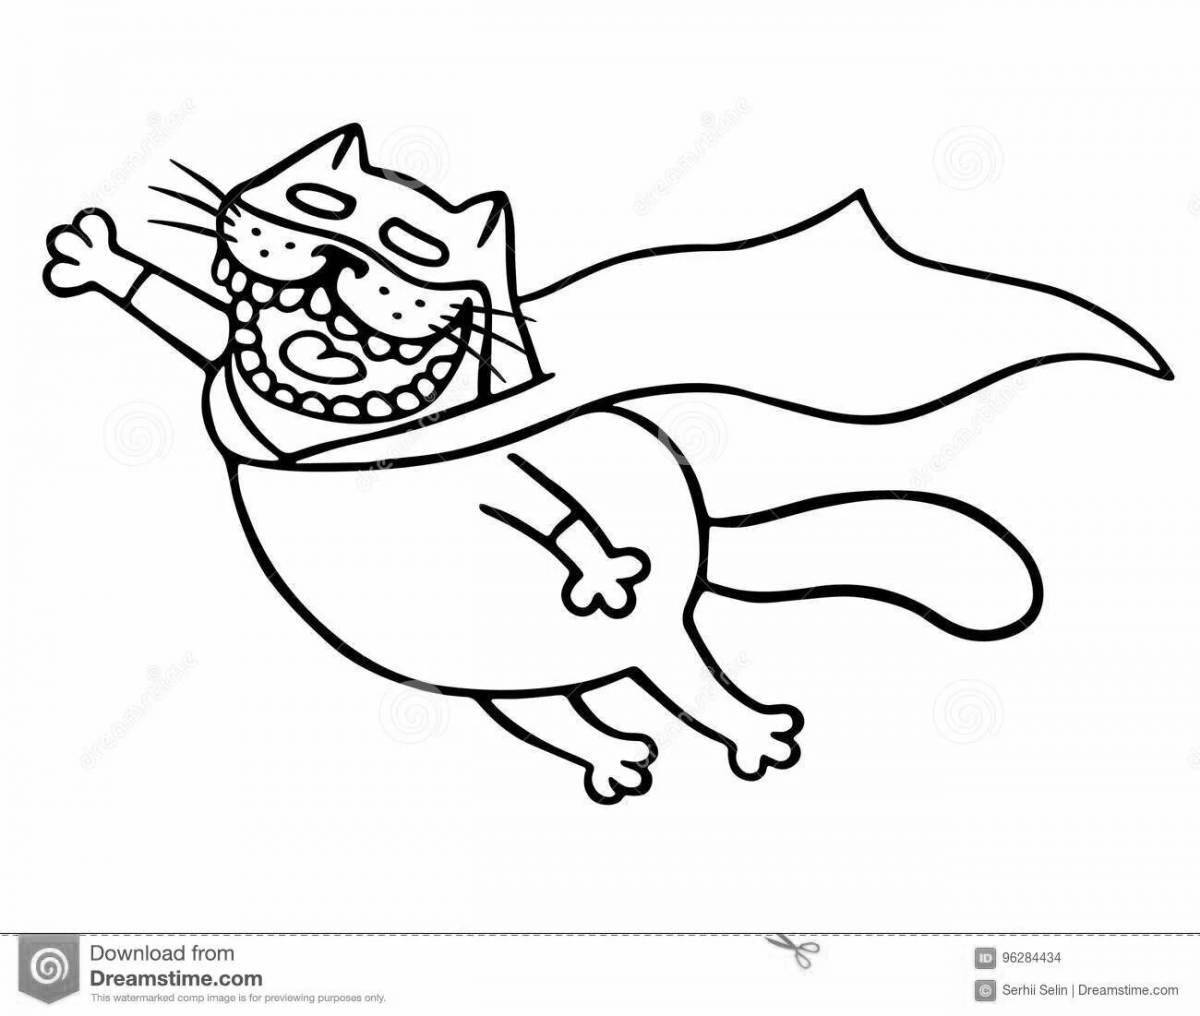 Coloring page adorable flying cat